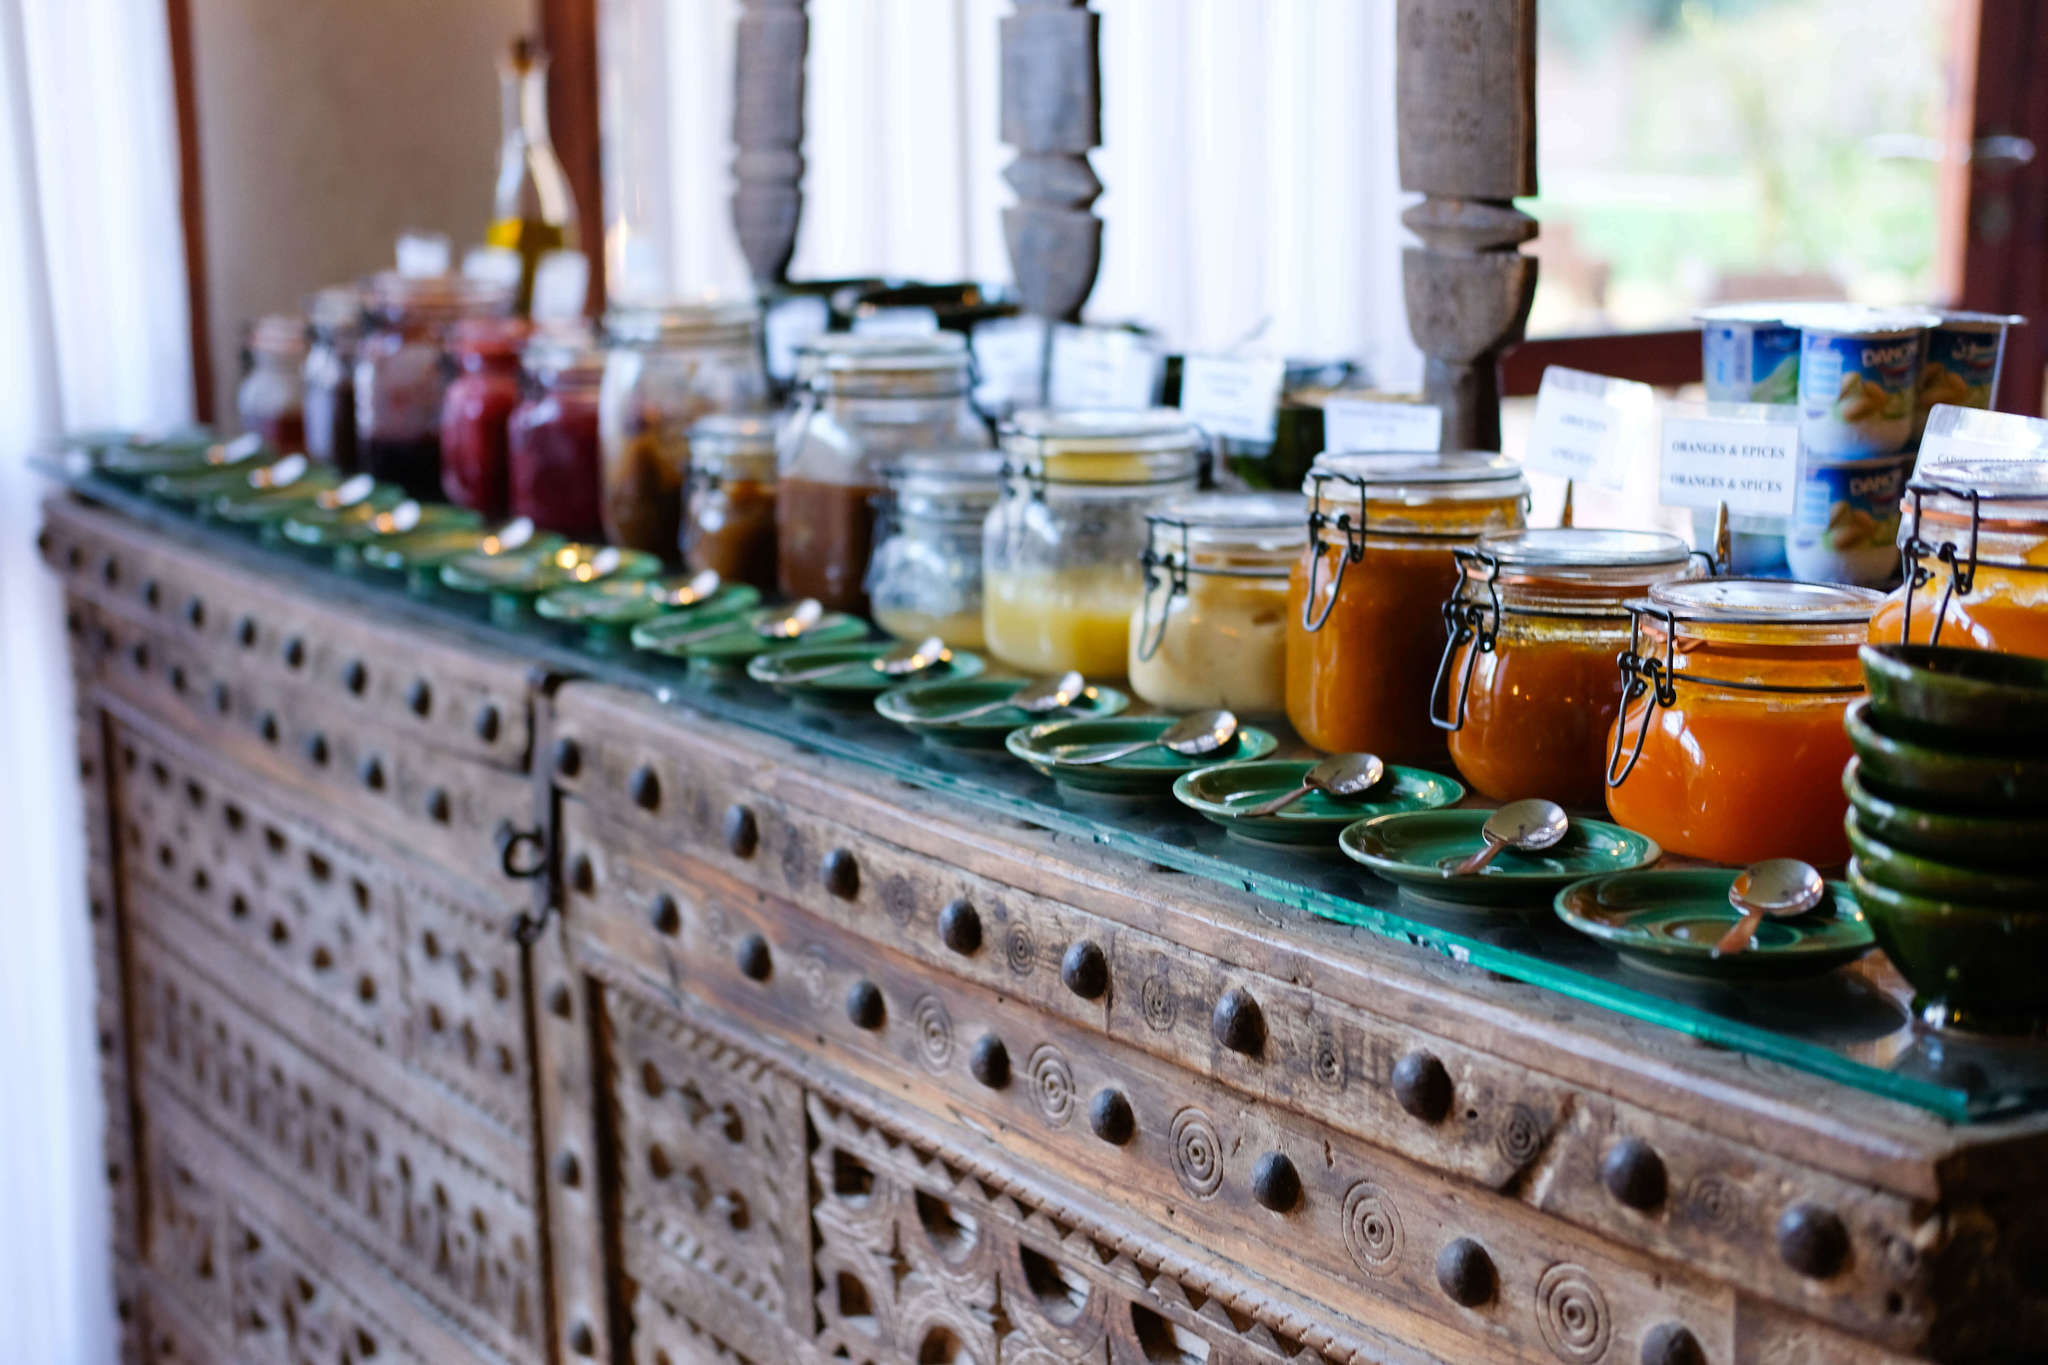 Typical spices in Morocco